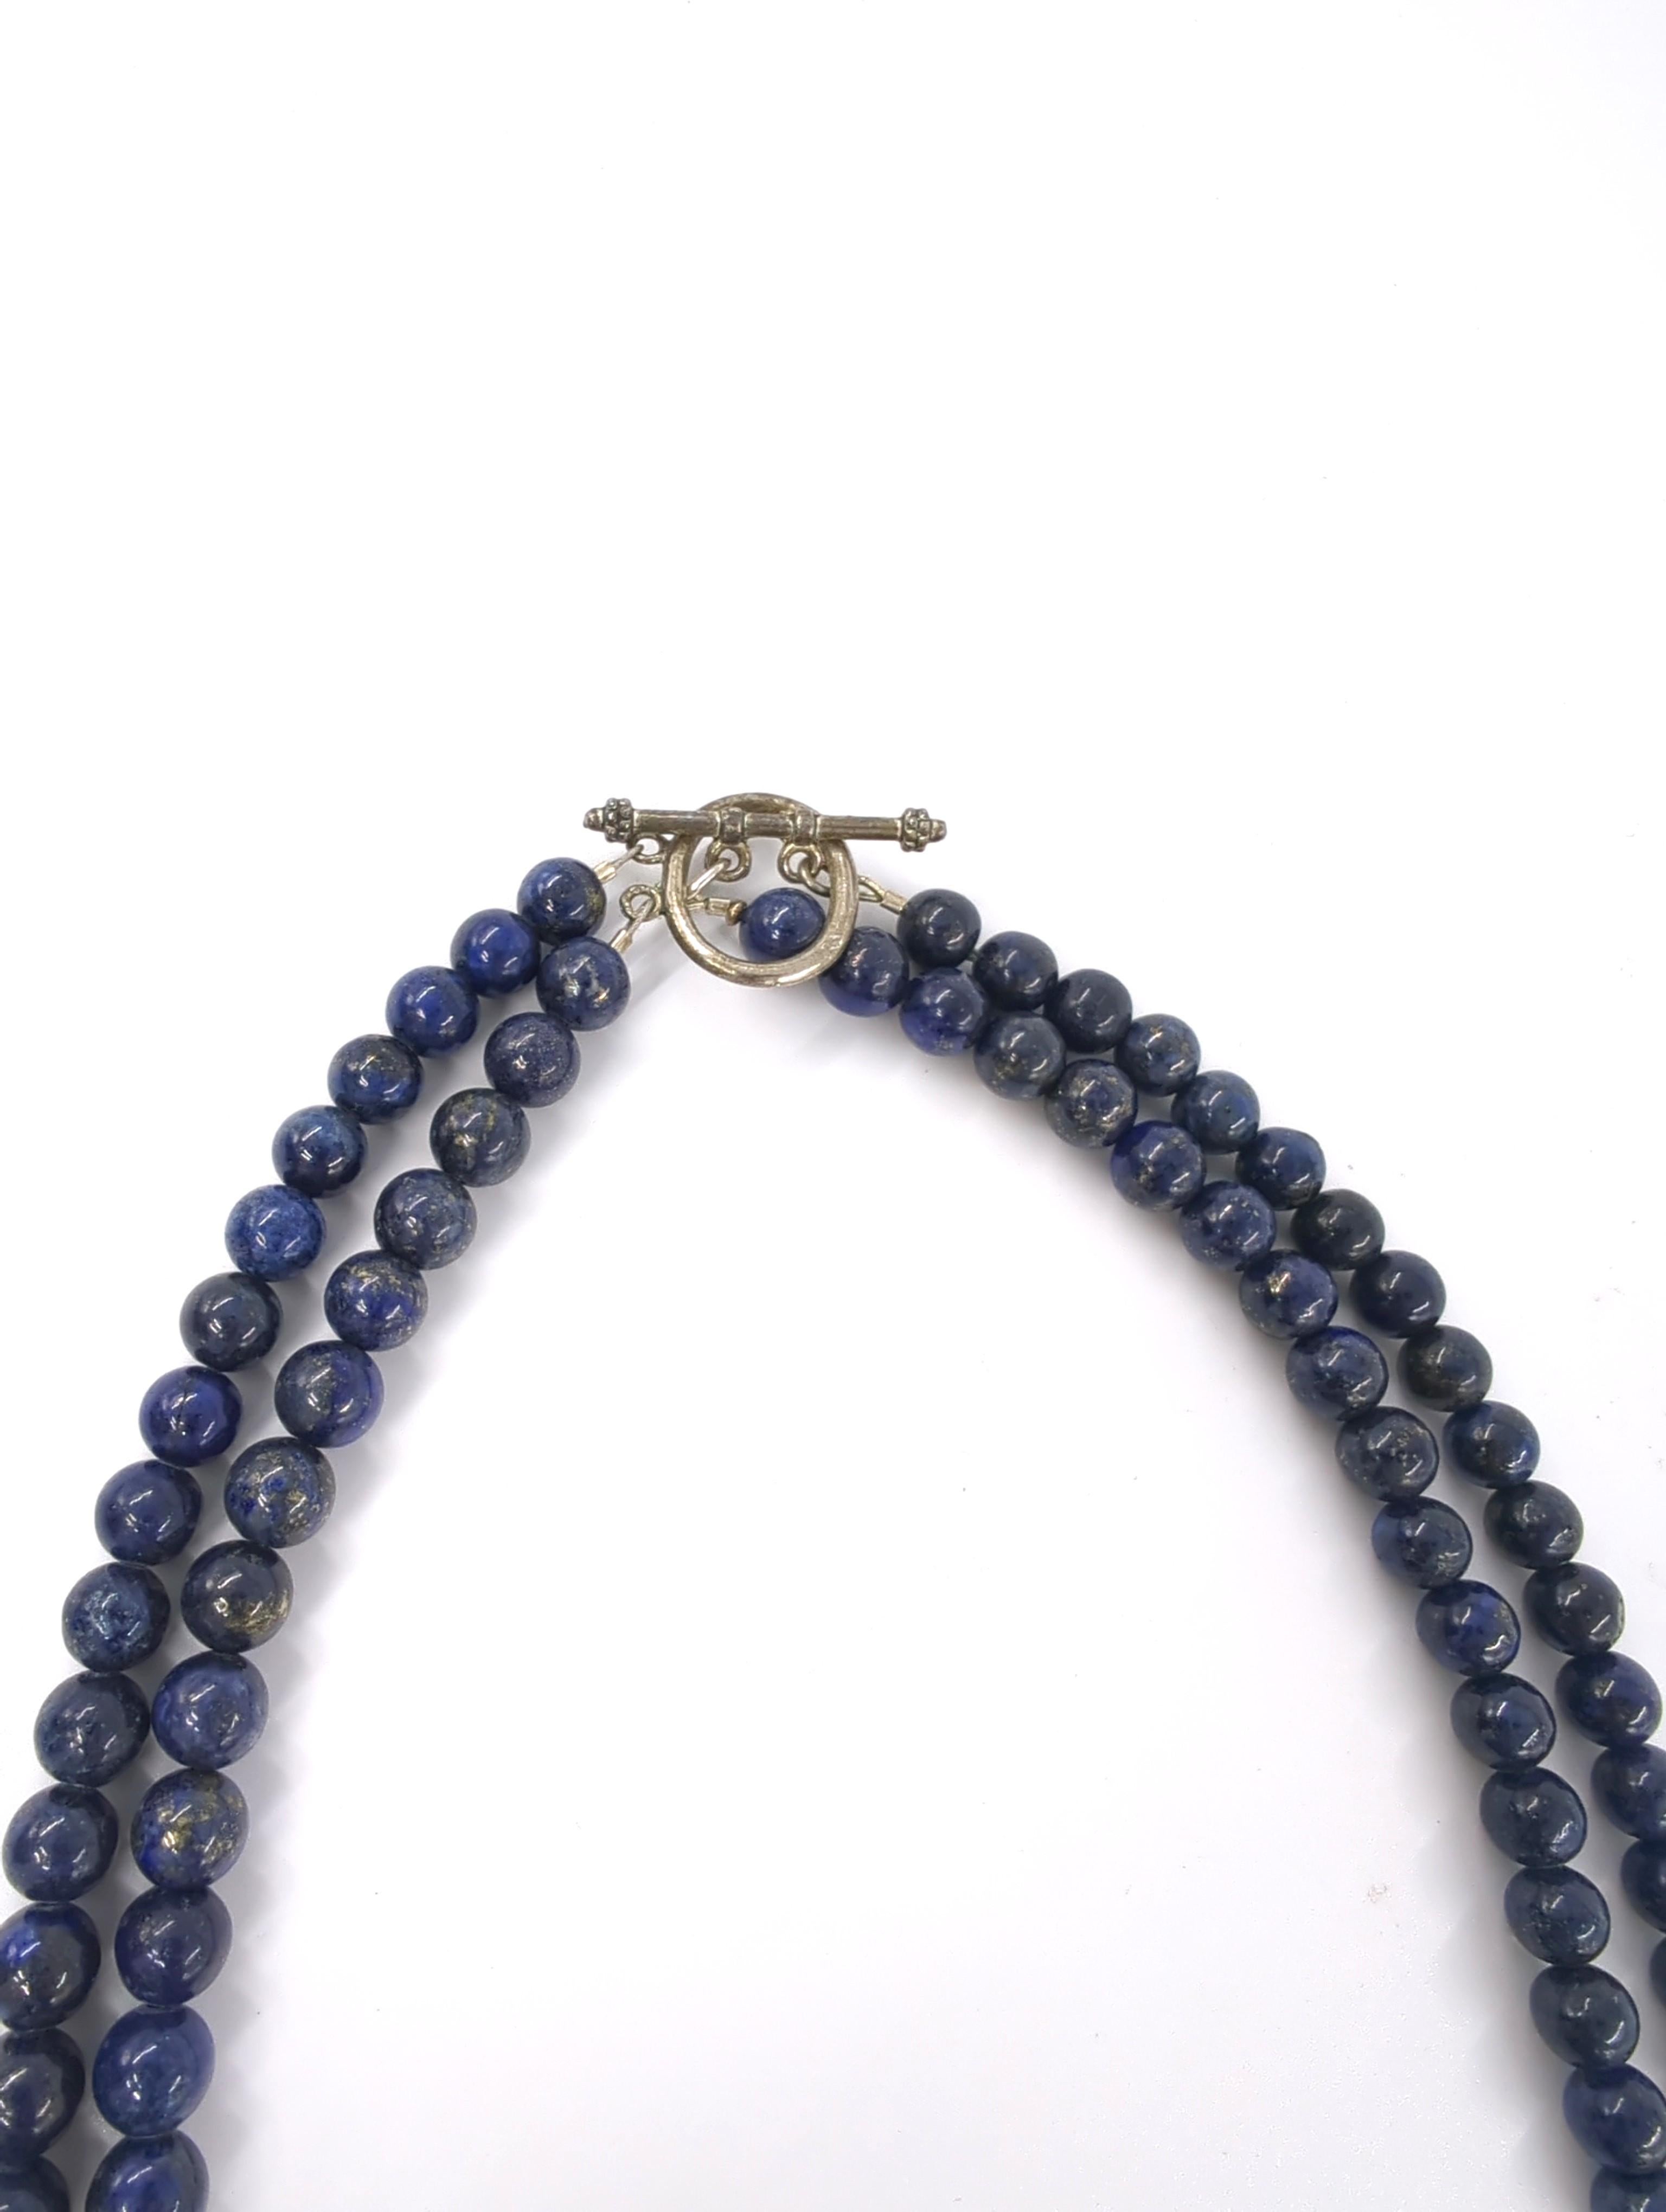 Vintage Chinese Silver Lapis Lazuli Necklace Double Dragon Pendant Multi-wear  In Good Condition For Sale In Richmond, CA